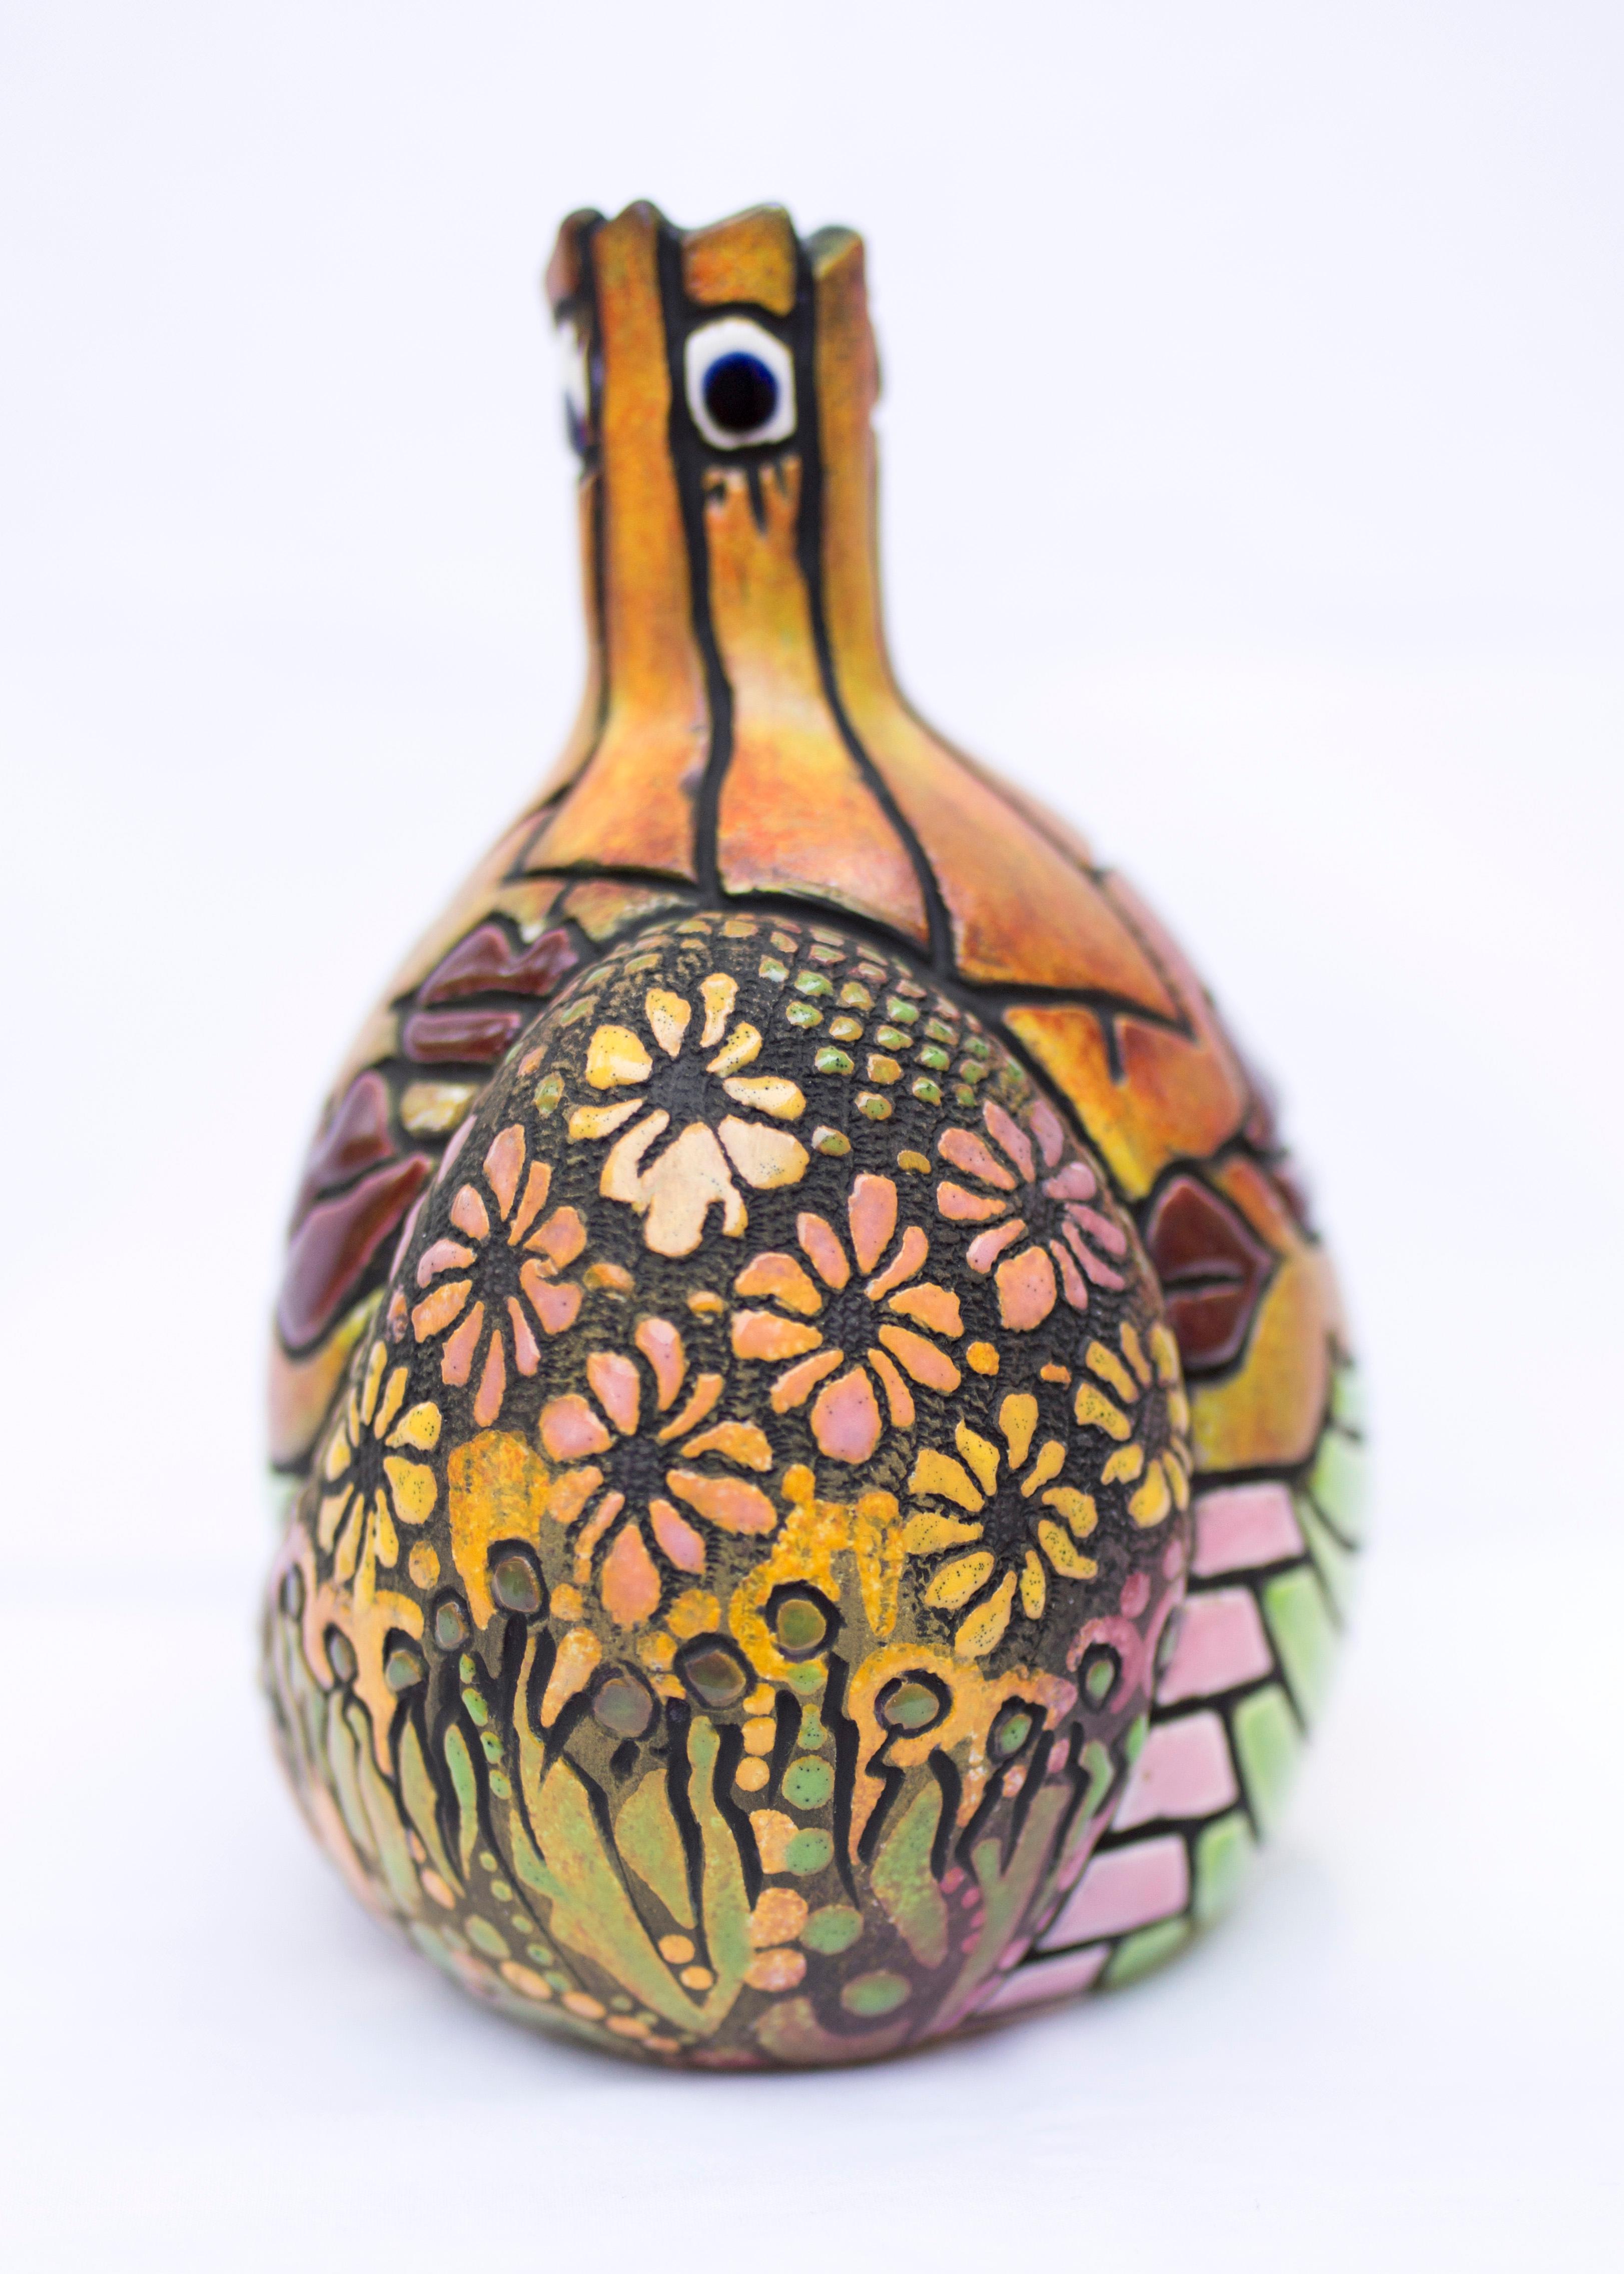 Fired to cone 01. Glaze fired to cone 07. Low fire glaze applications.

ARTIST STATEMENT

My work passionately reflects my Mexican cultural roots. The art forms appear and are created as stories in the round as I transform and mutate a magic fusion